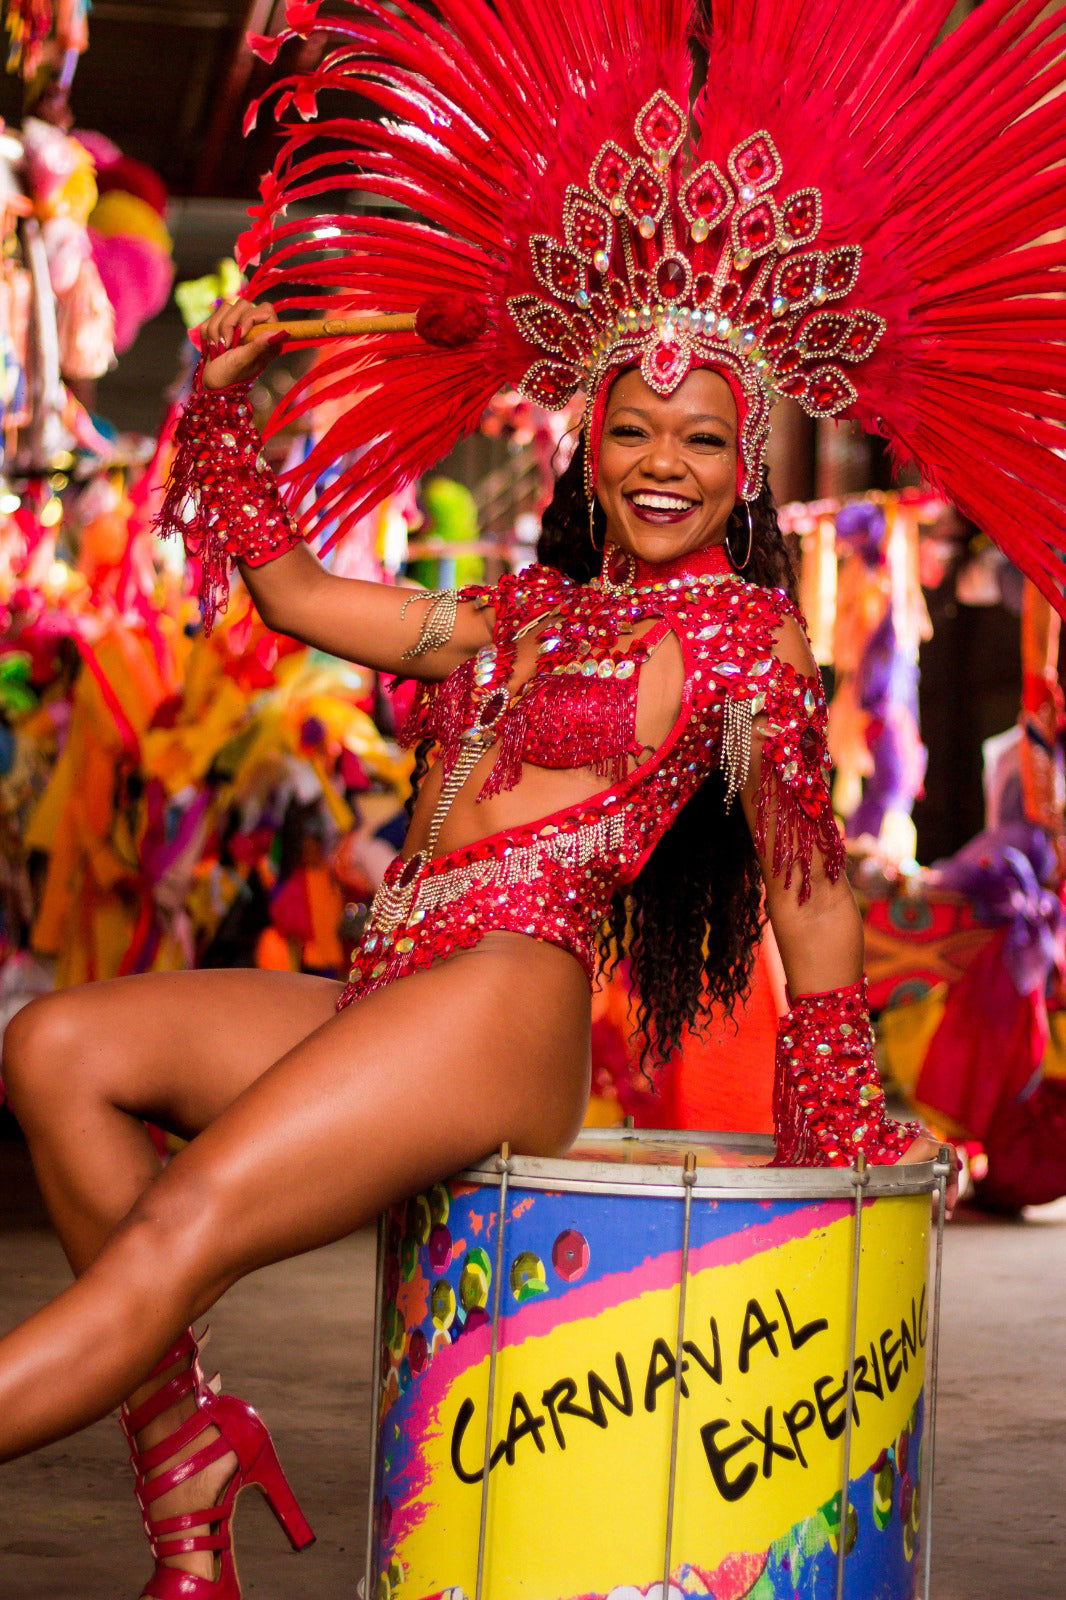 Backstage tour of Carnival in Cidade do Samba with welcome drinks.